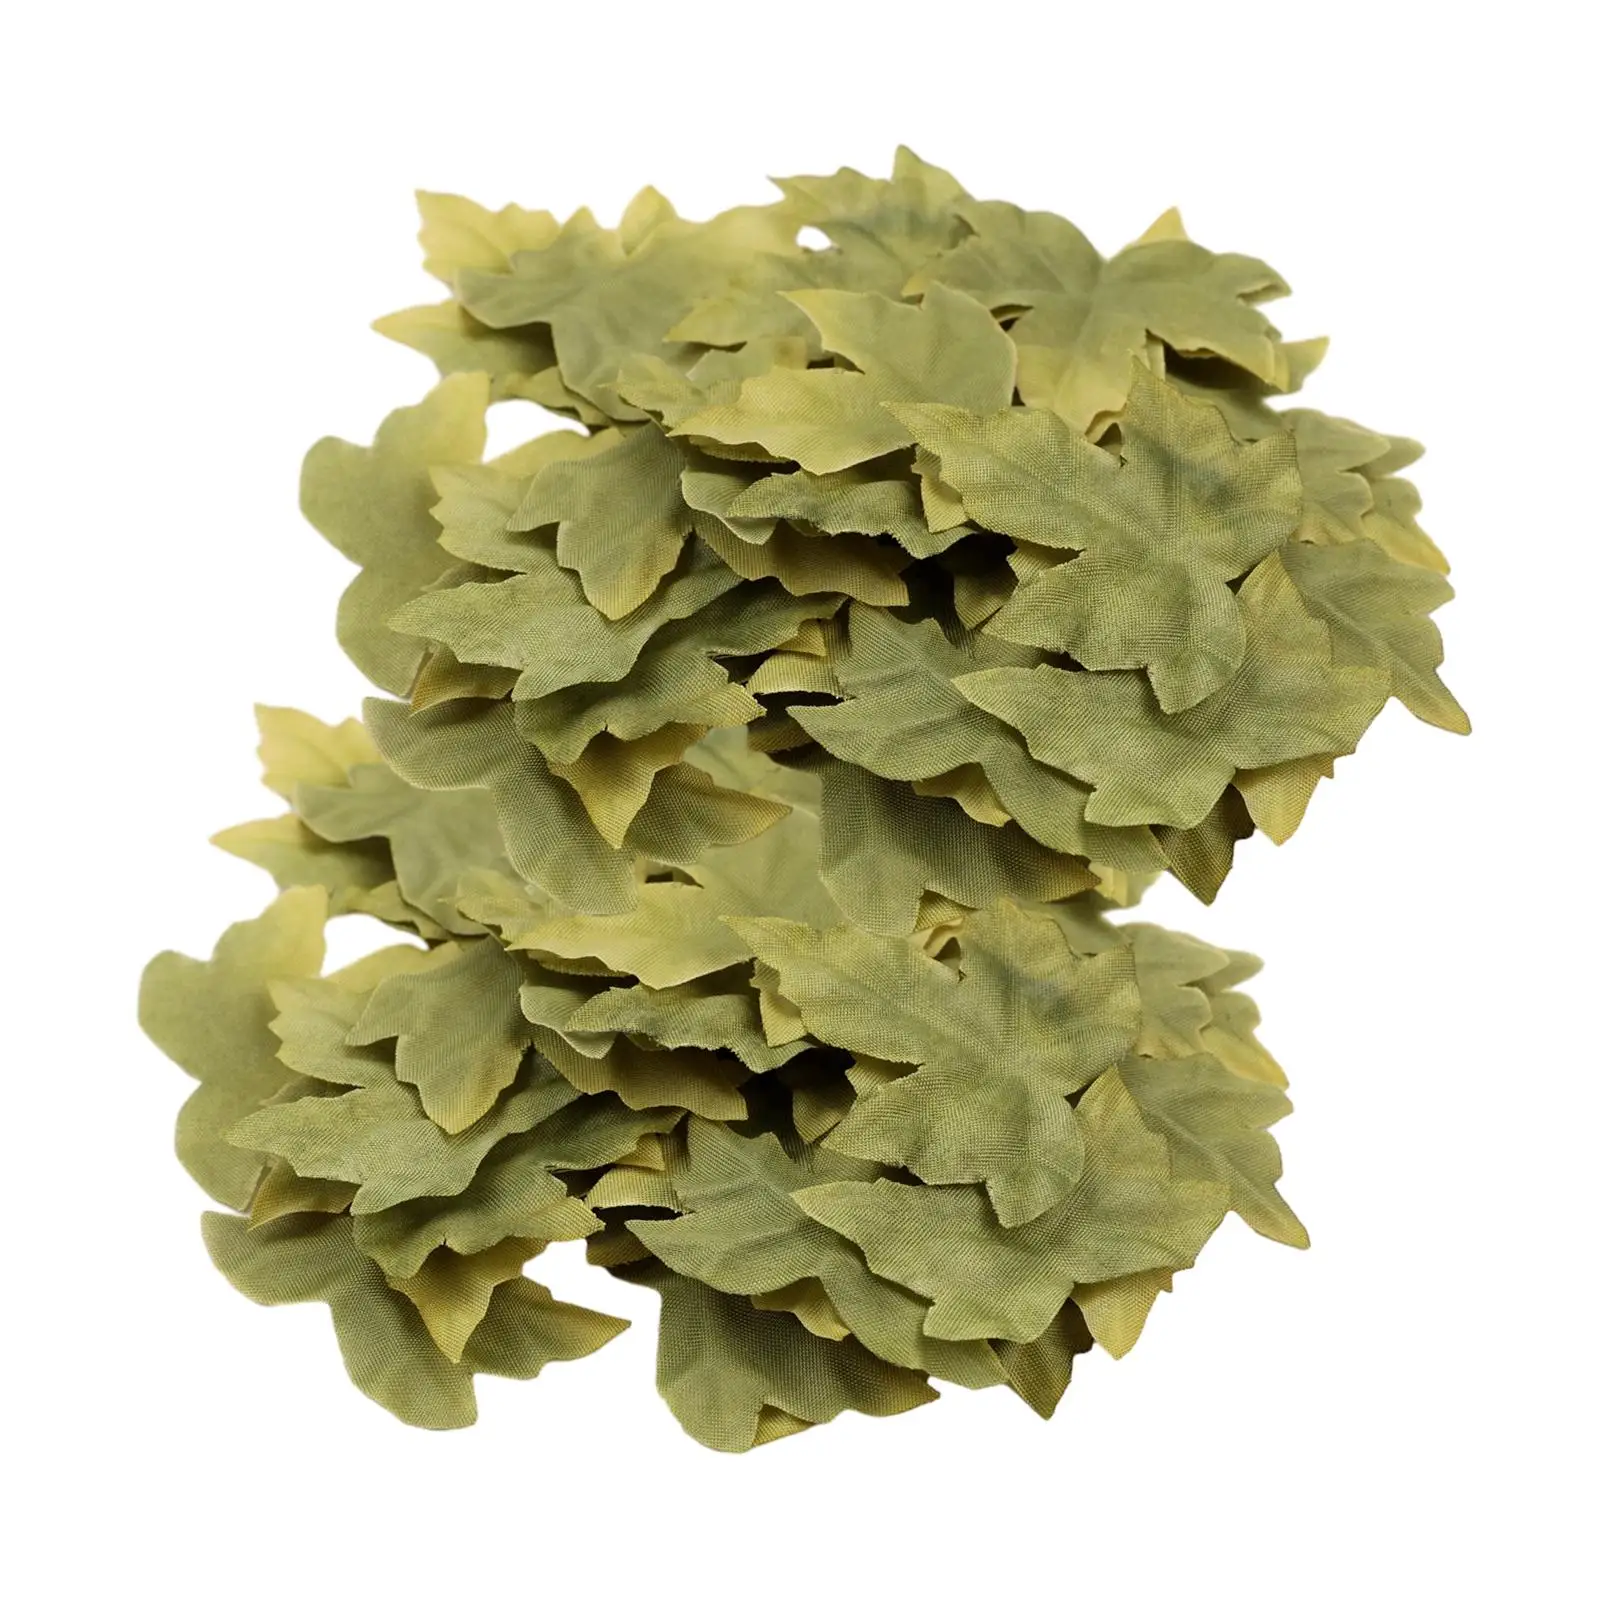 200 Pieces Artificial Maple Leaves Craft Supplies Decorative Maple Leaf for Floral Bouquet Party Home Office Dinner Table Wreath